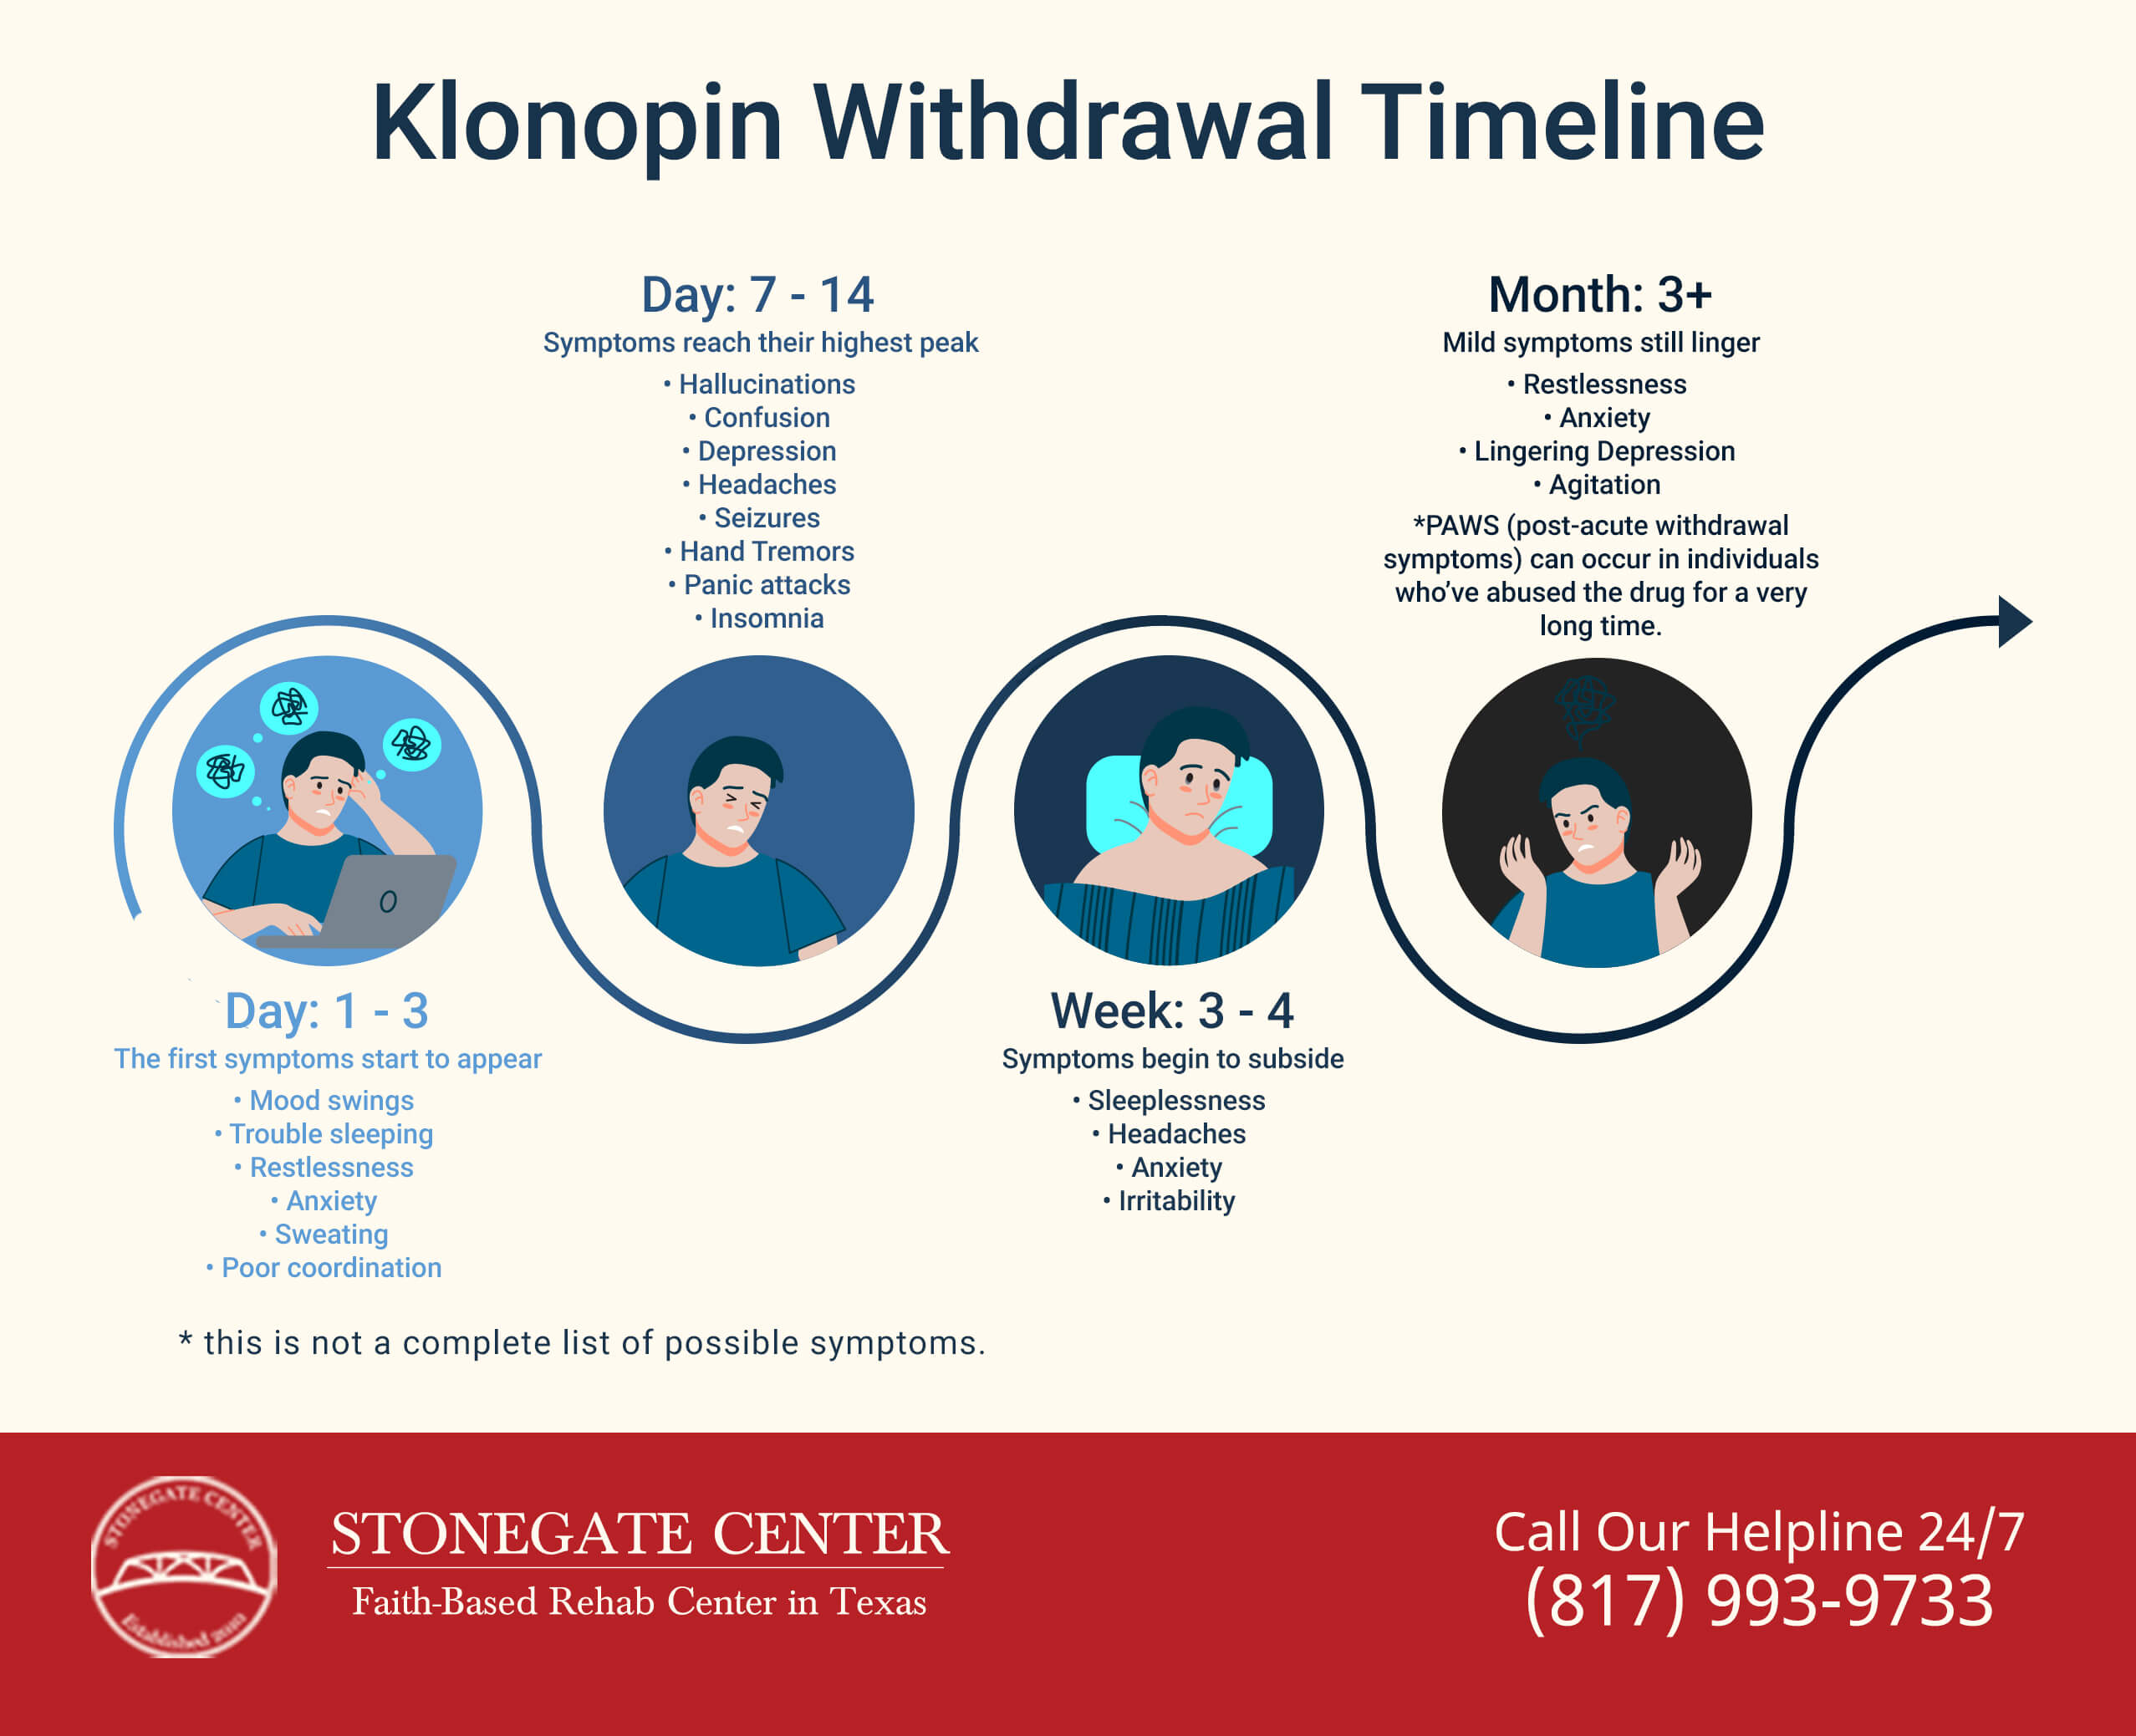 Stonegate Center Blog - Is Klonopin More Dangerous Than Cocaine - Klonopin Withdrawal Timeline